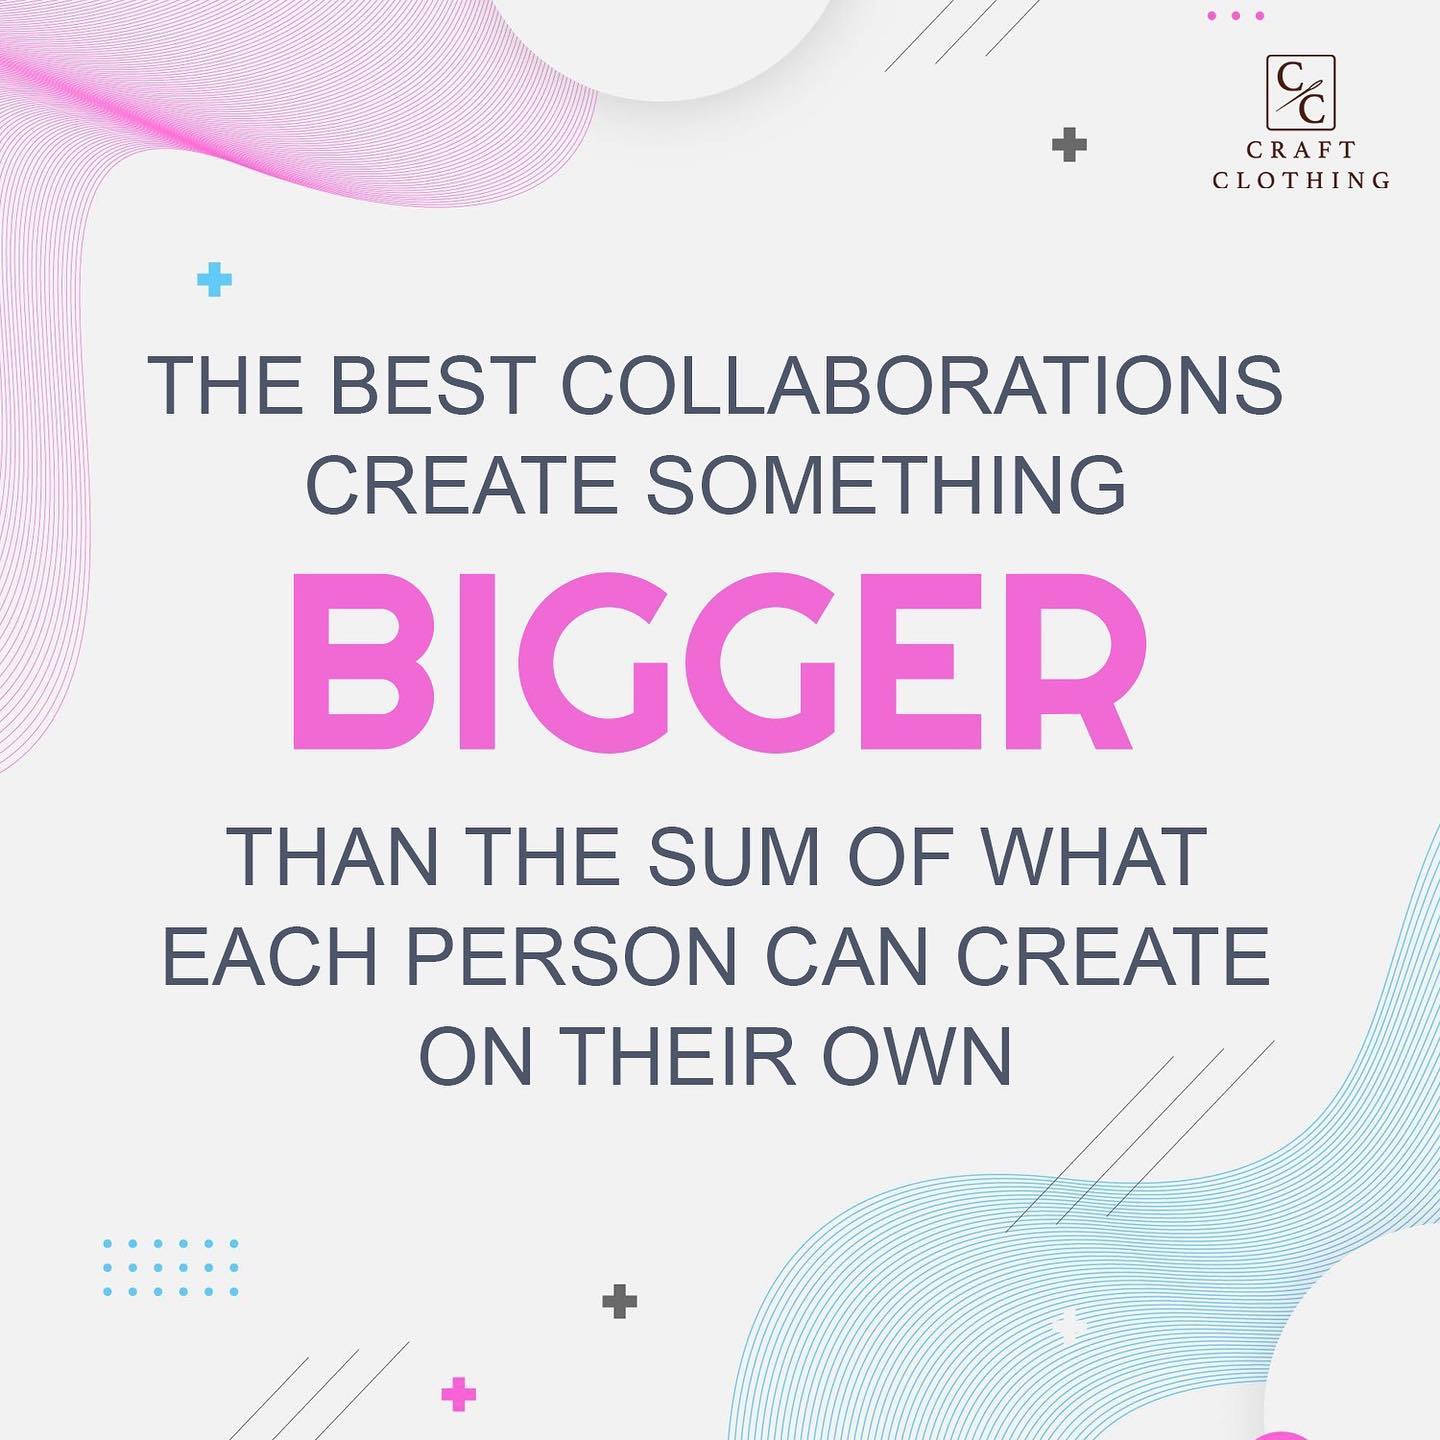 The best collaborations create something BIGGER than the sum of each person can create on their own